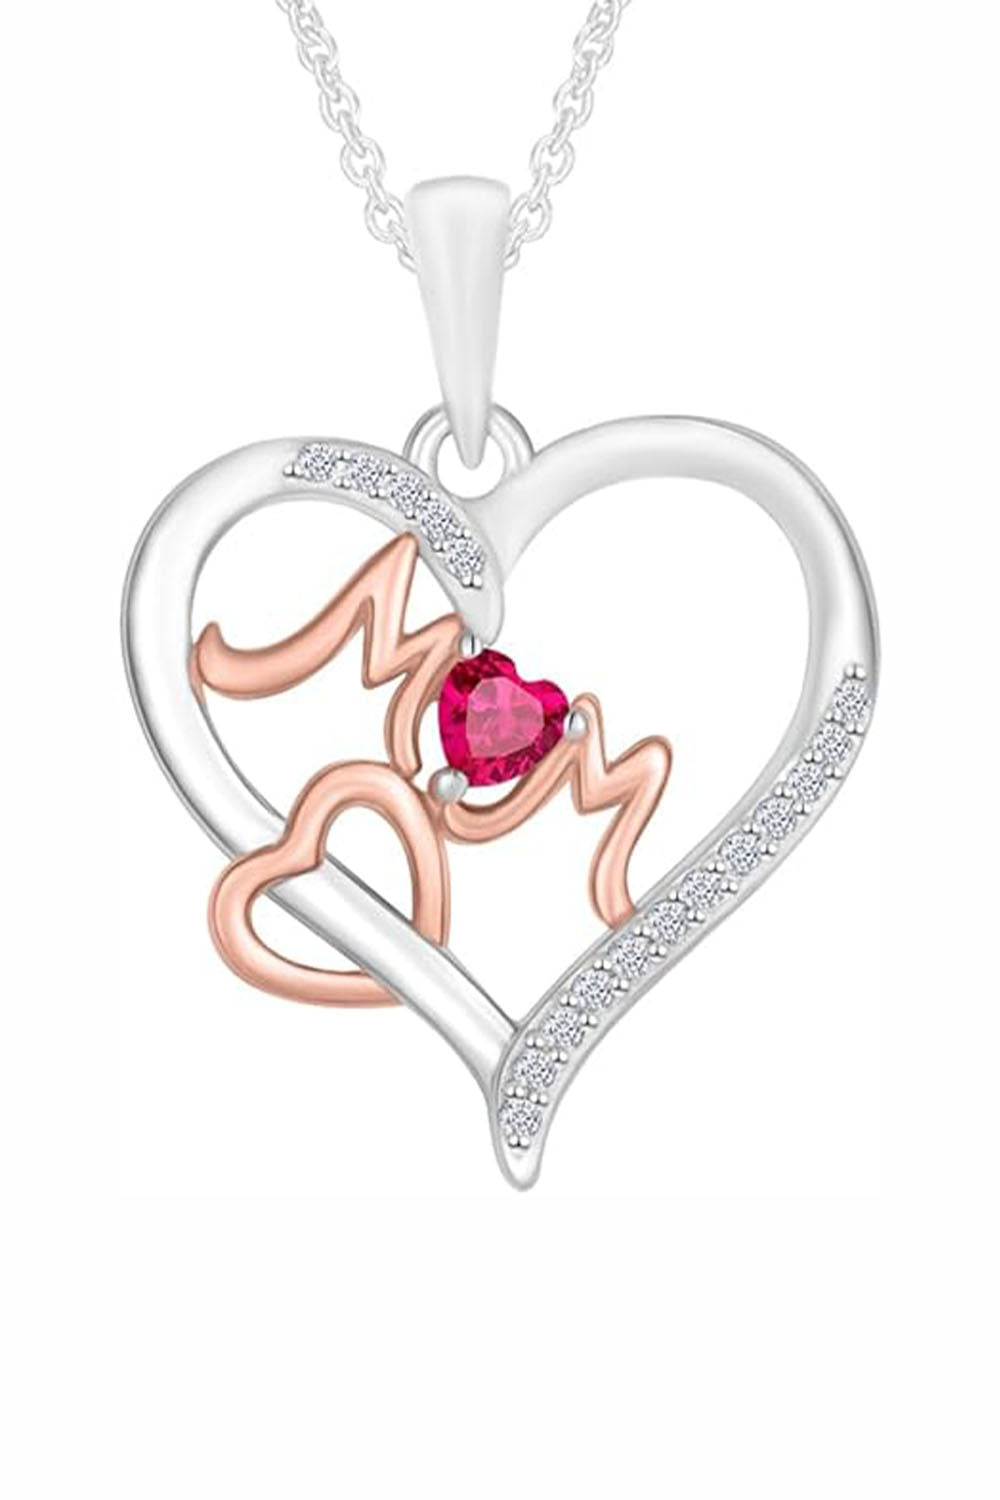 Yaathi 1/2 Carat Moissanite and Ruby Double Heart Mom Pendant Necklace in 18k Two tone Gold Over Sterling Silver Jewellery.